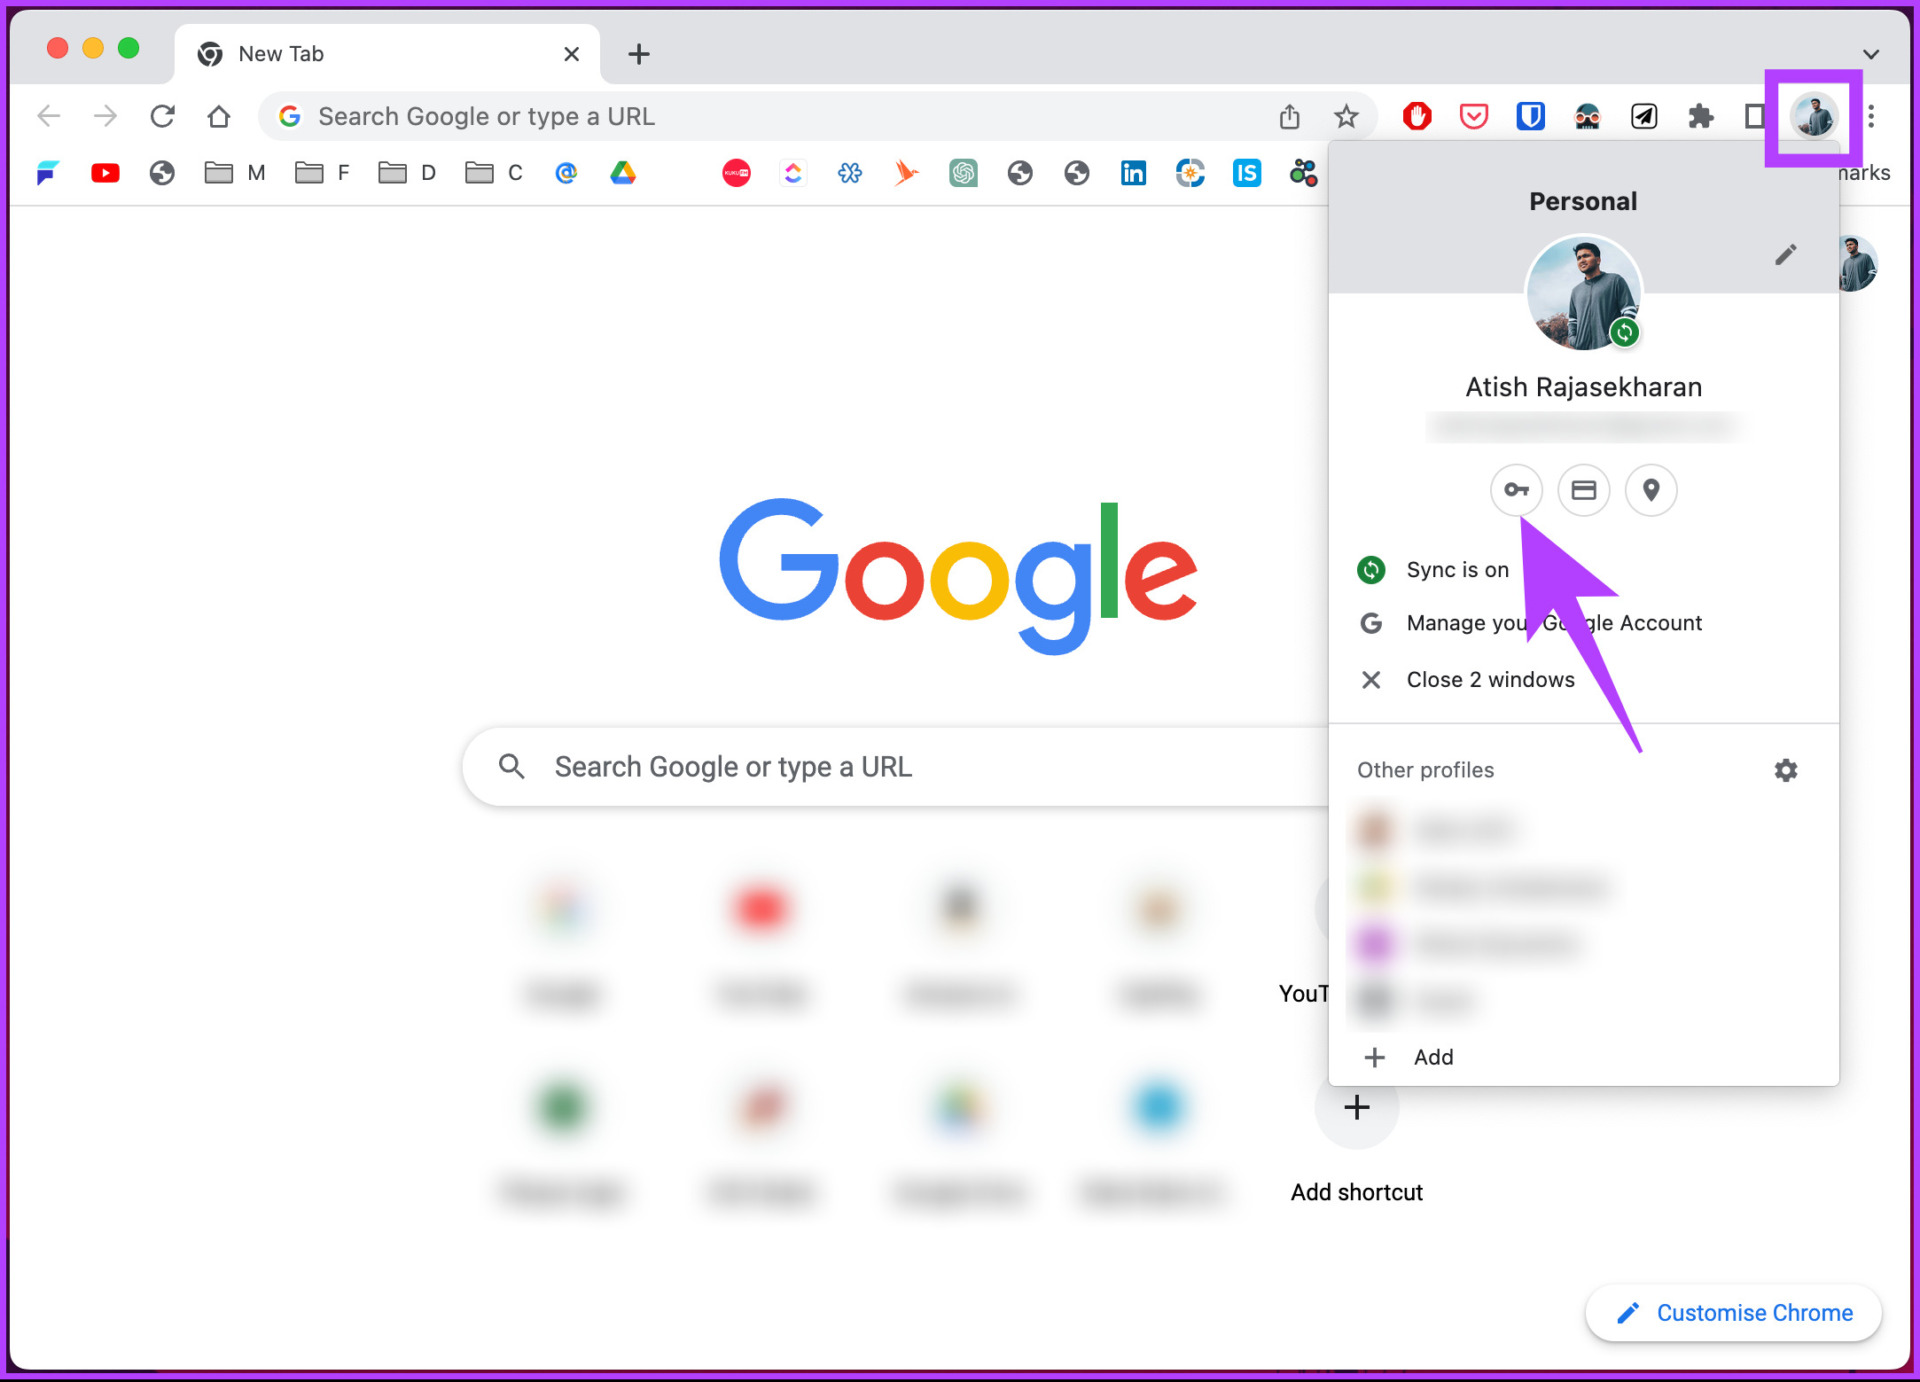 Chrome profile picture and click on the Key icon